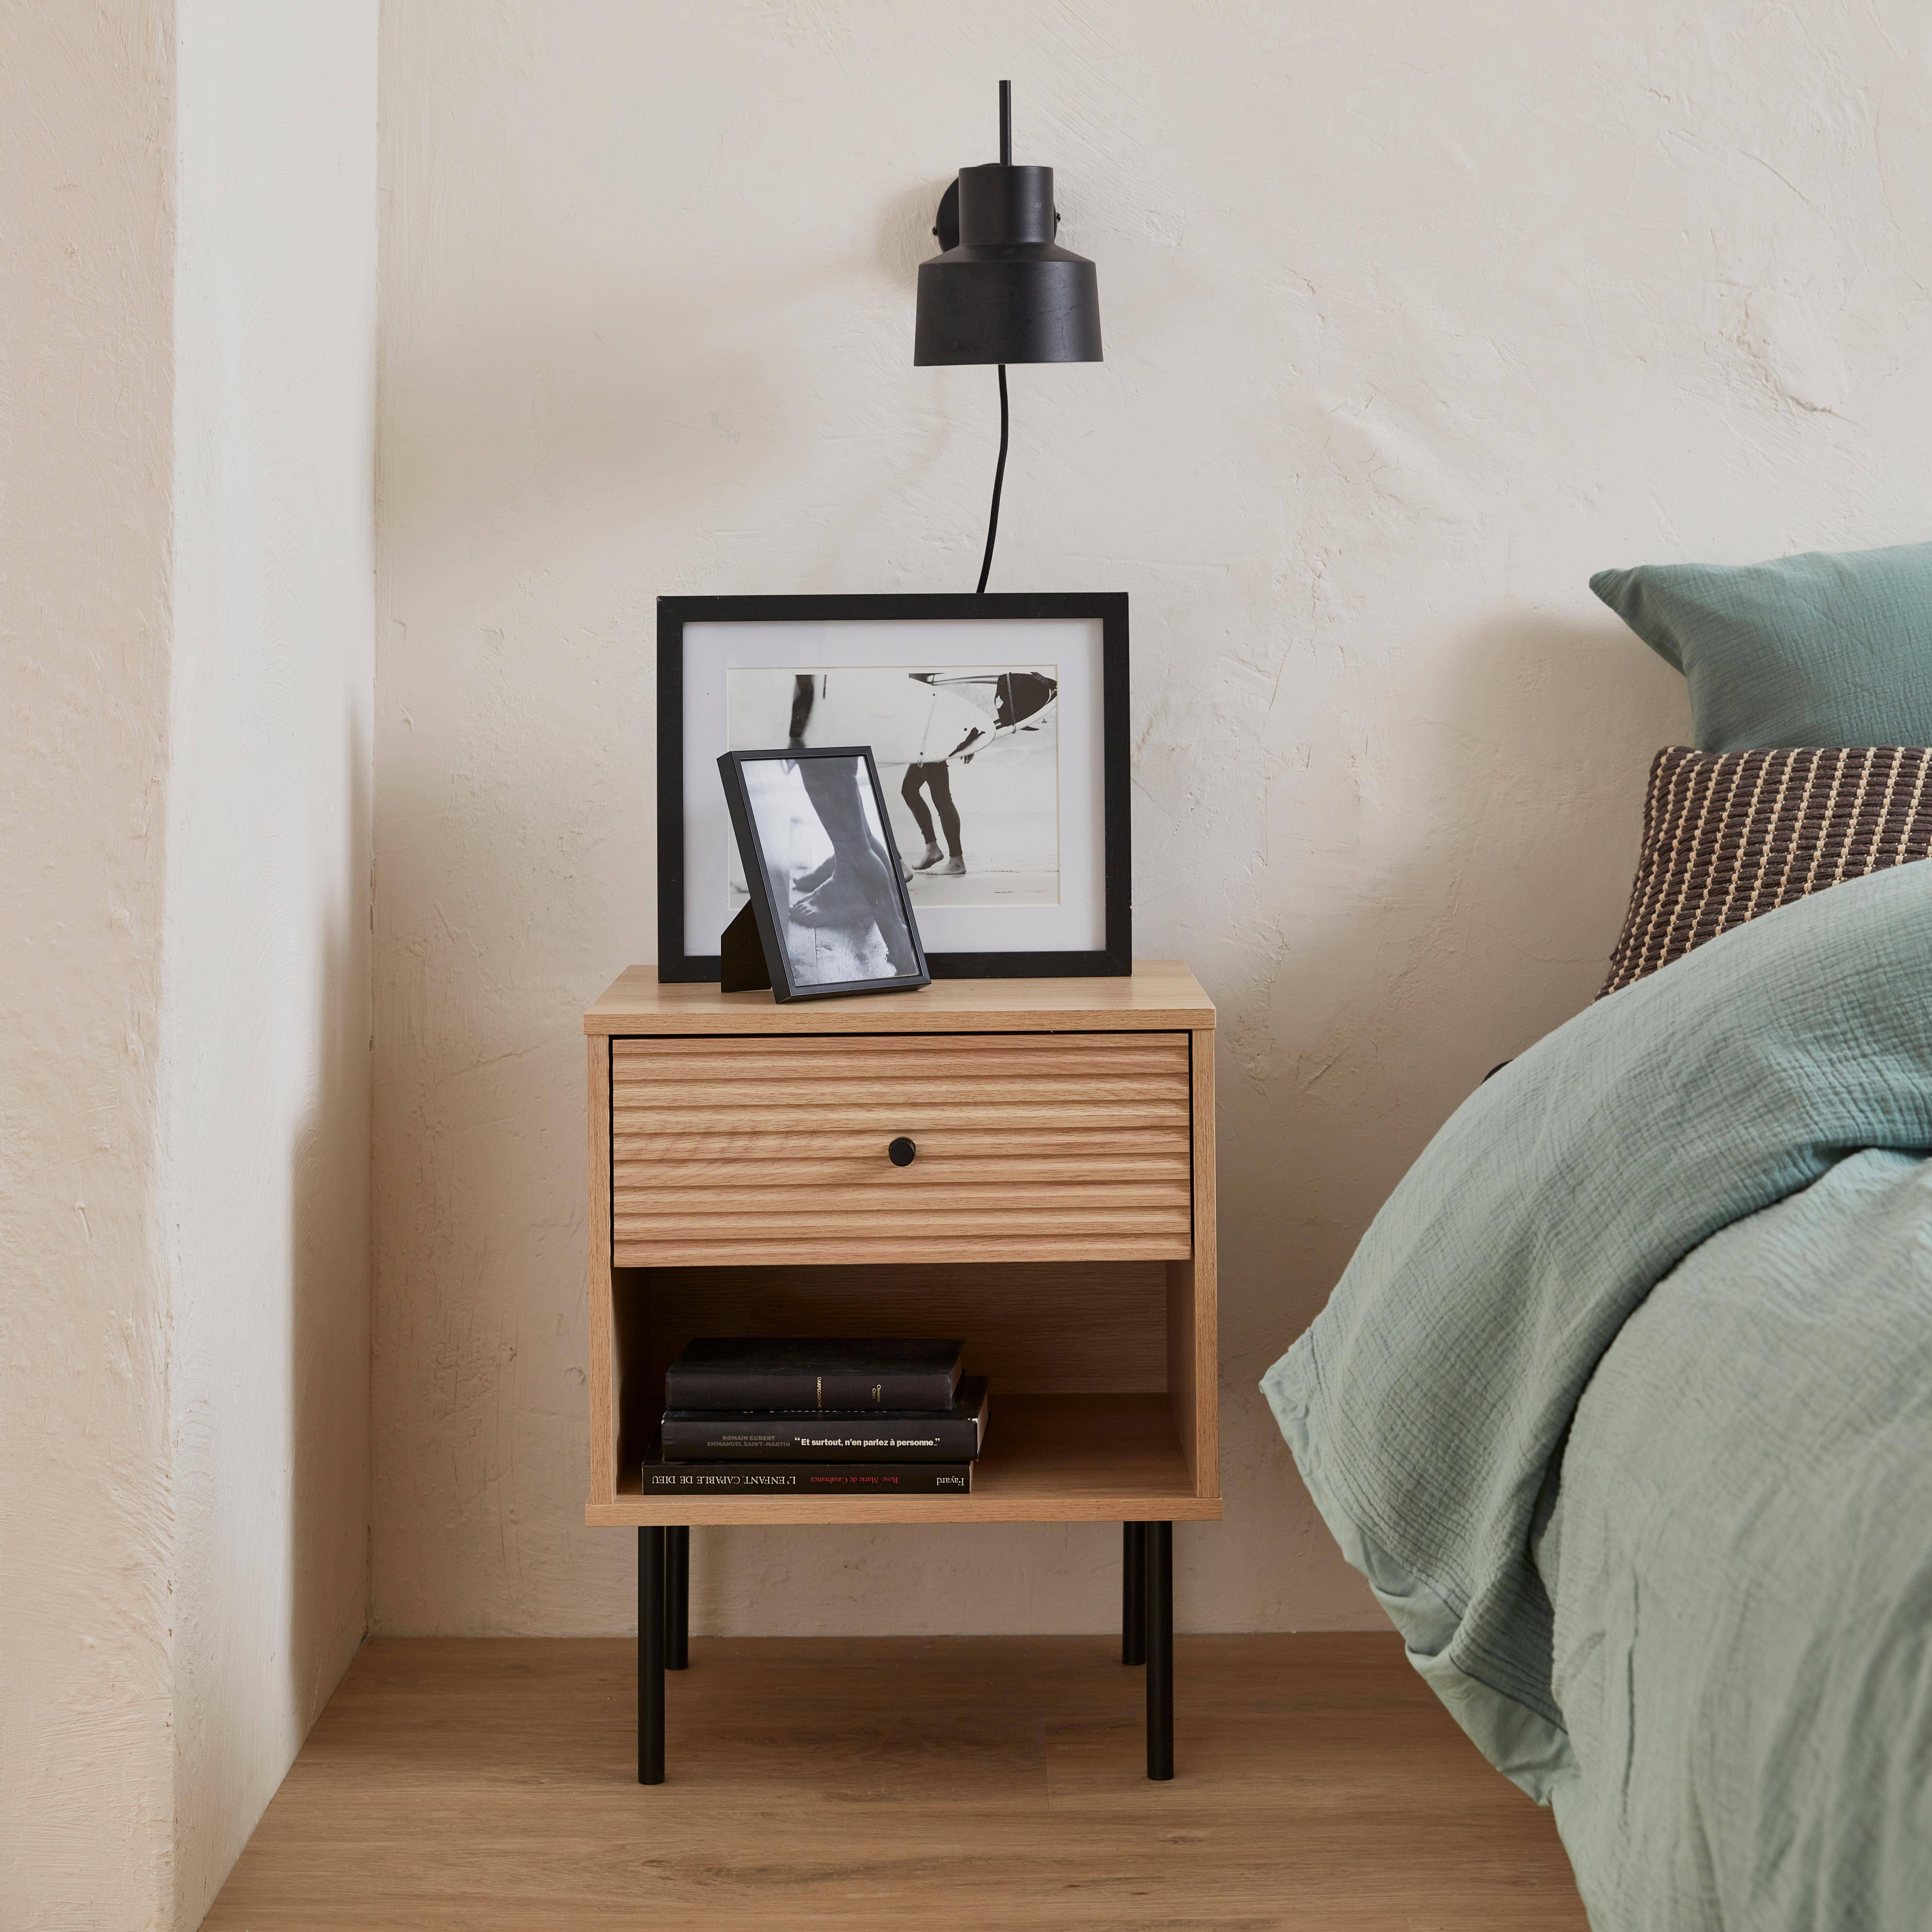 Grooved wood-effect bedside table, 45x39.5x55cm - Braga - Natural wood colour,sweeek,Photo1